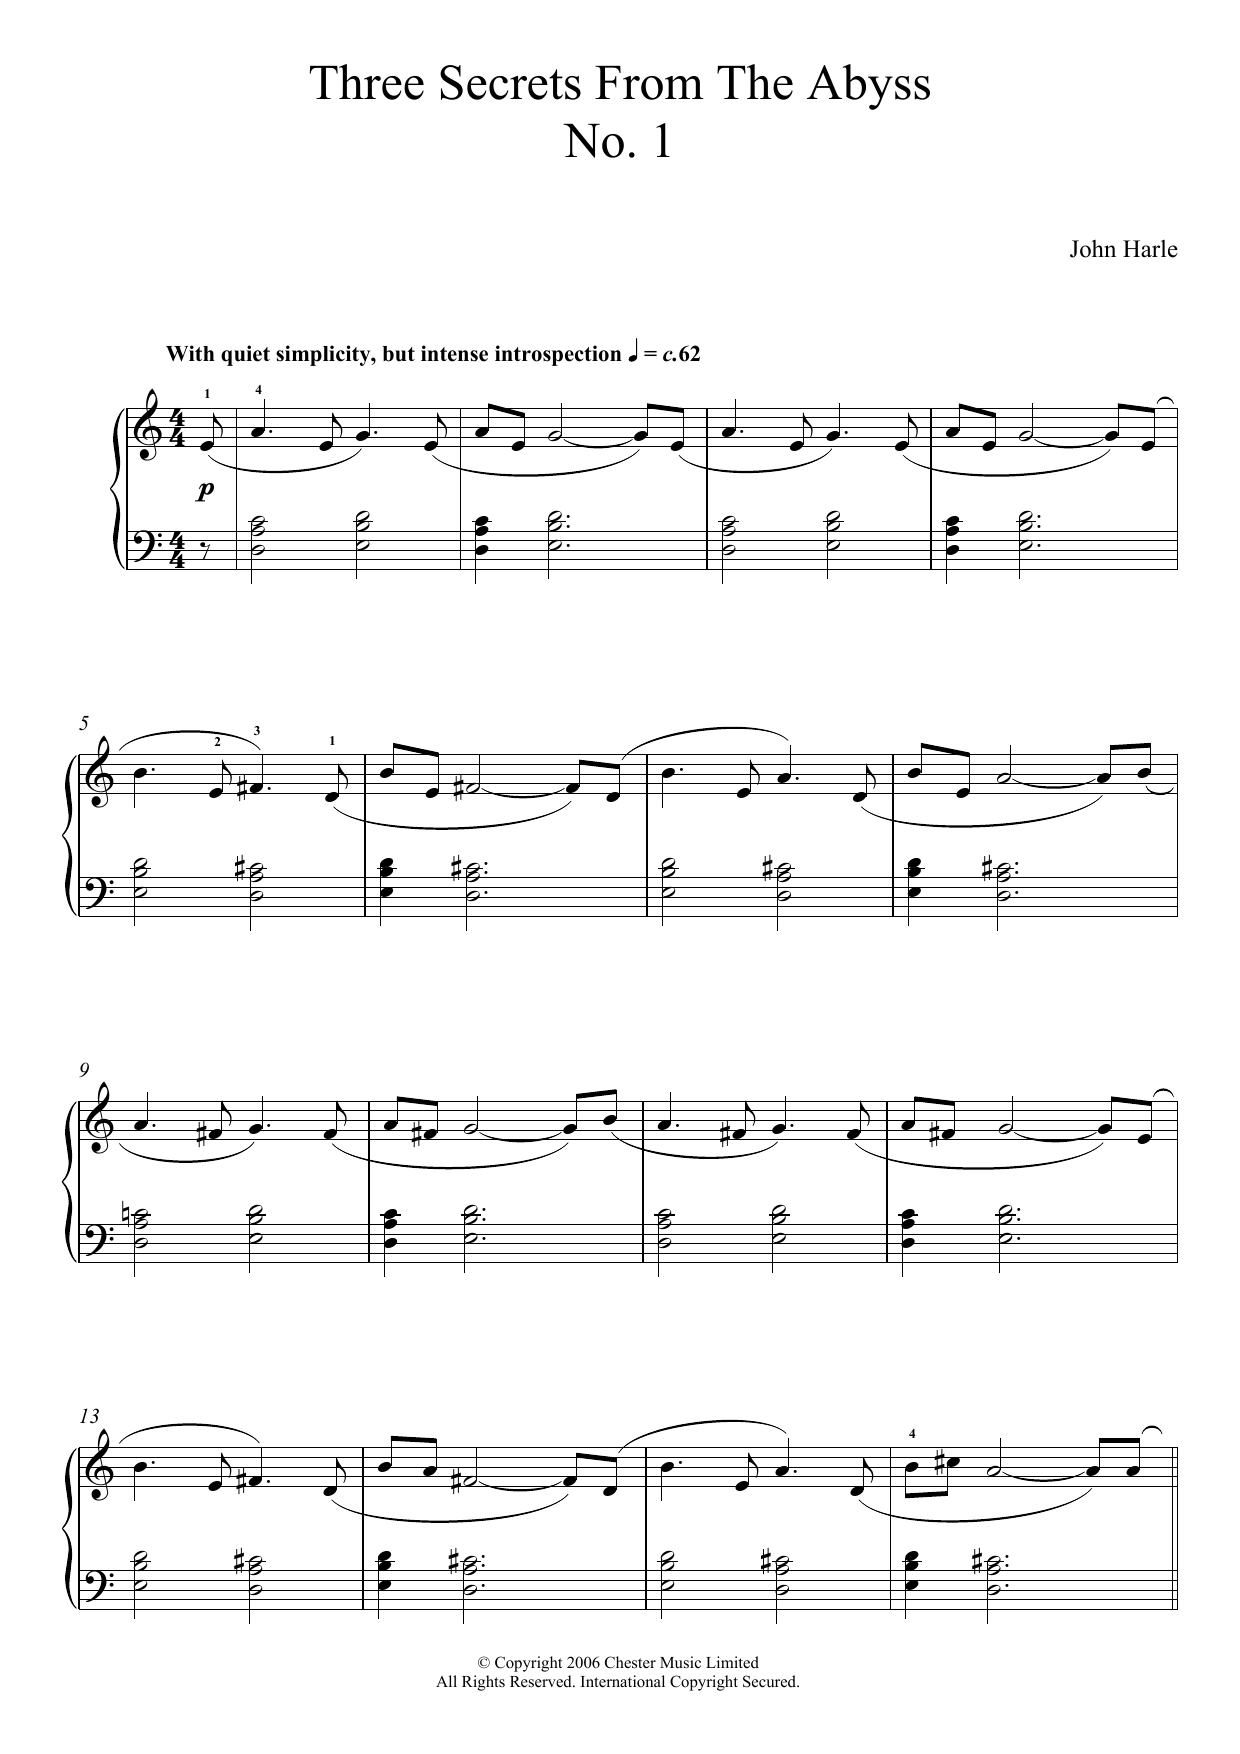 Download John Harle Three Secrets From The Abyss - No. 1 Sheet Music